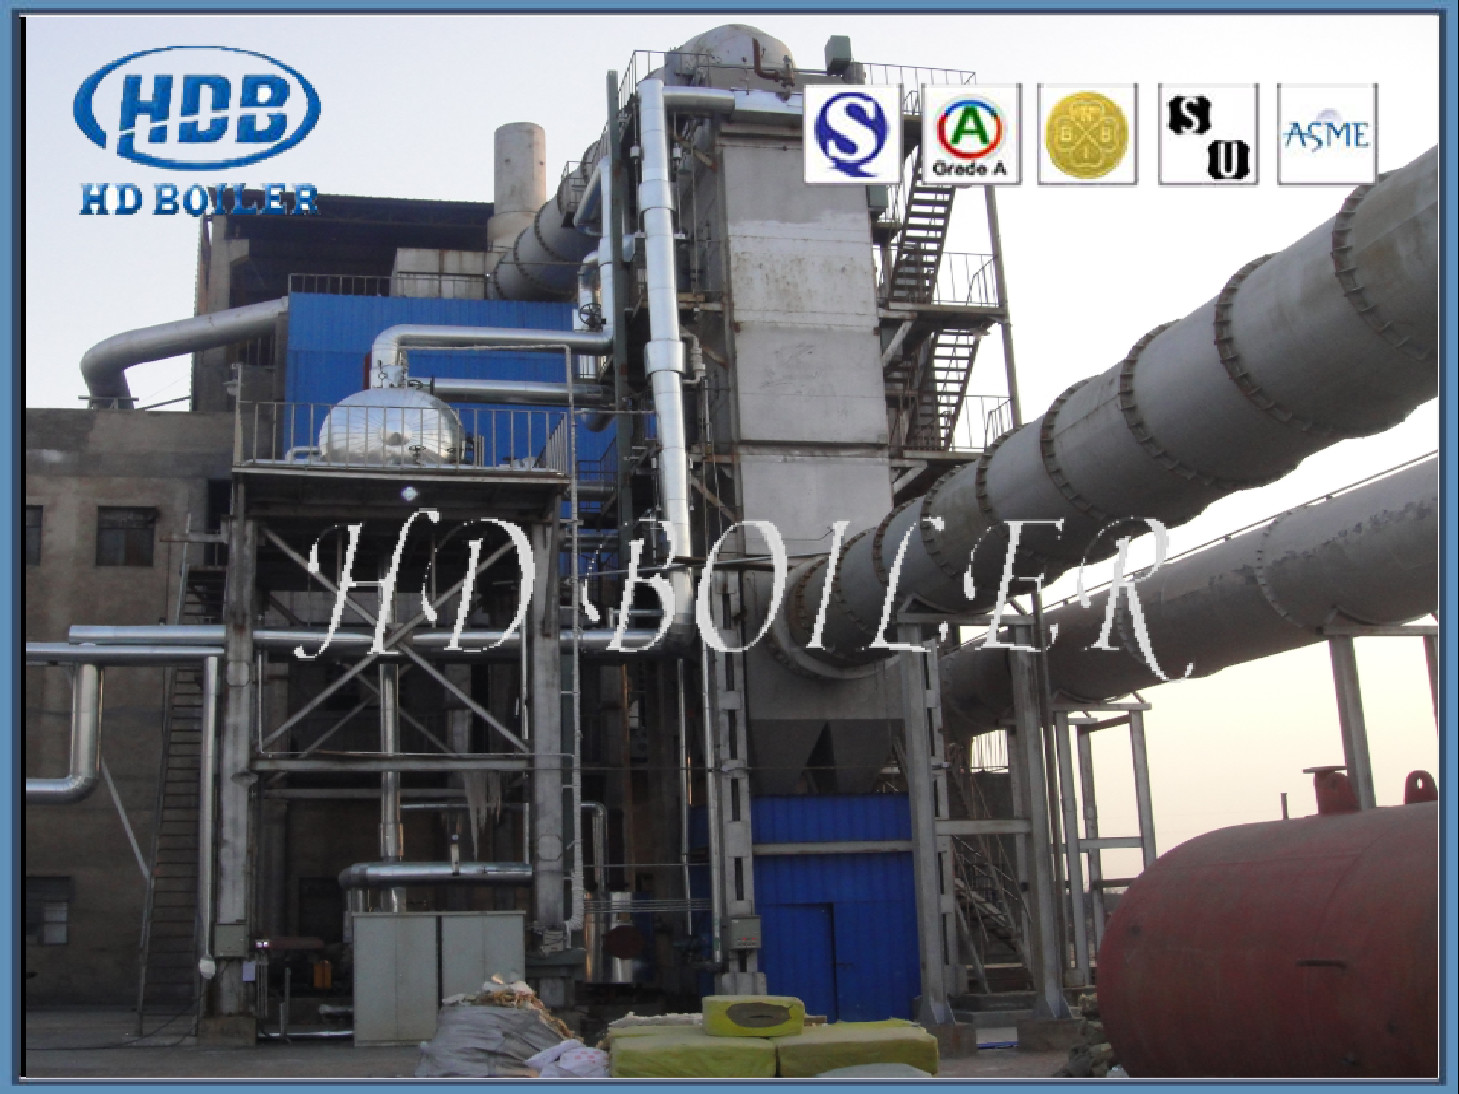 HRSG Professional Waste Acid Recycling Boiler With ASME National Board Standard